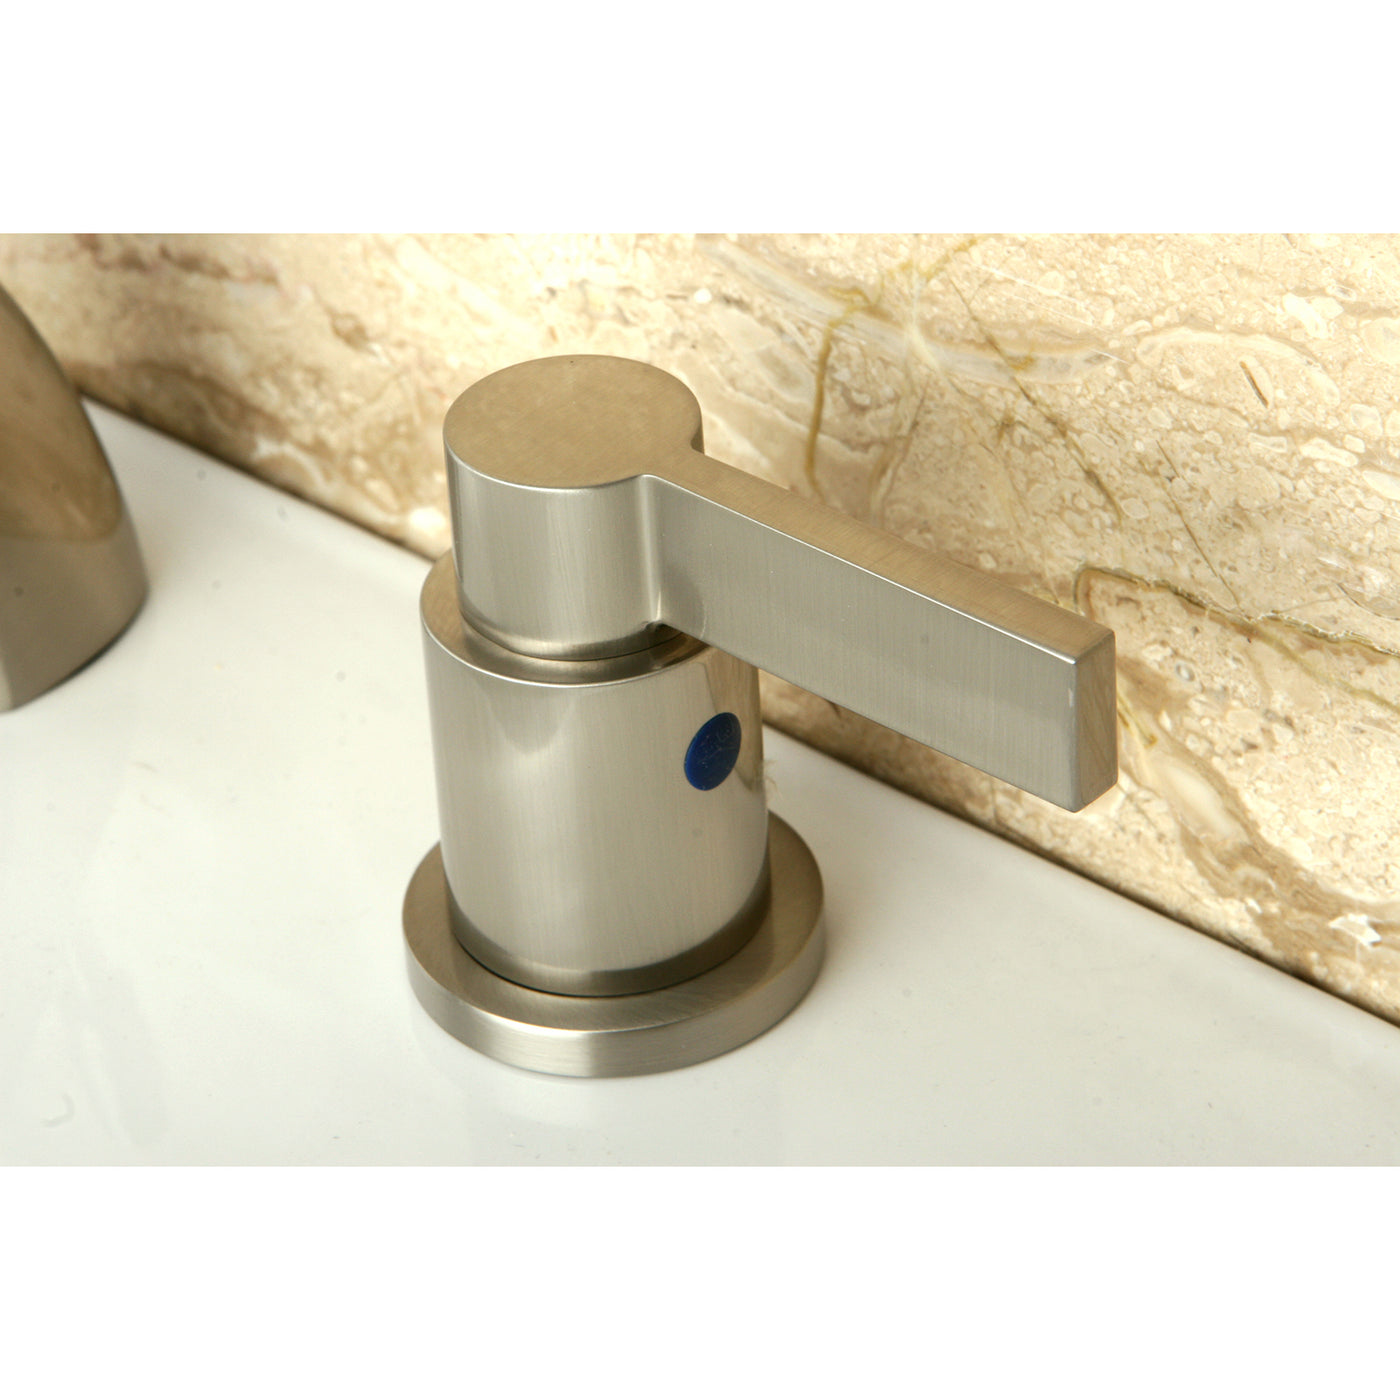 Elements of Design EB8958NDL Mini-Widespread Bathroom Faucet, Brushed Nickel